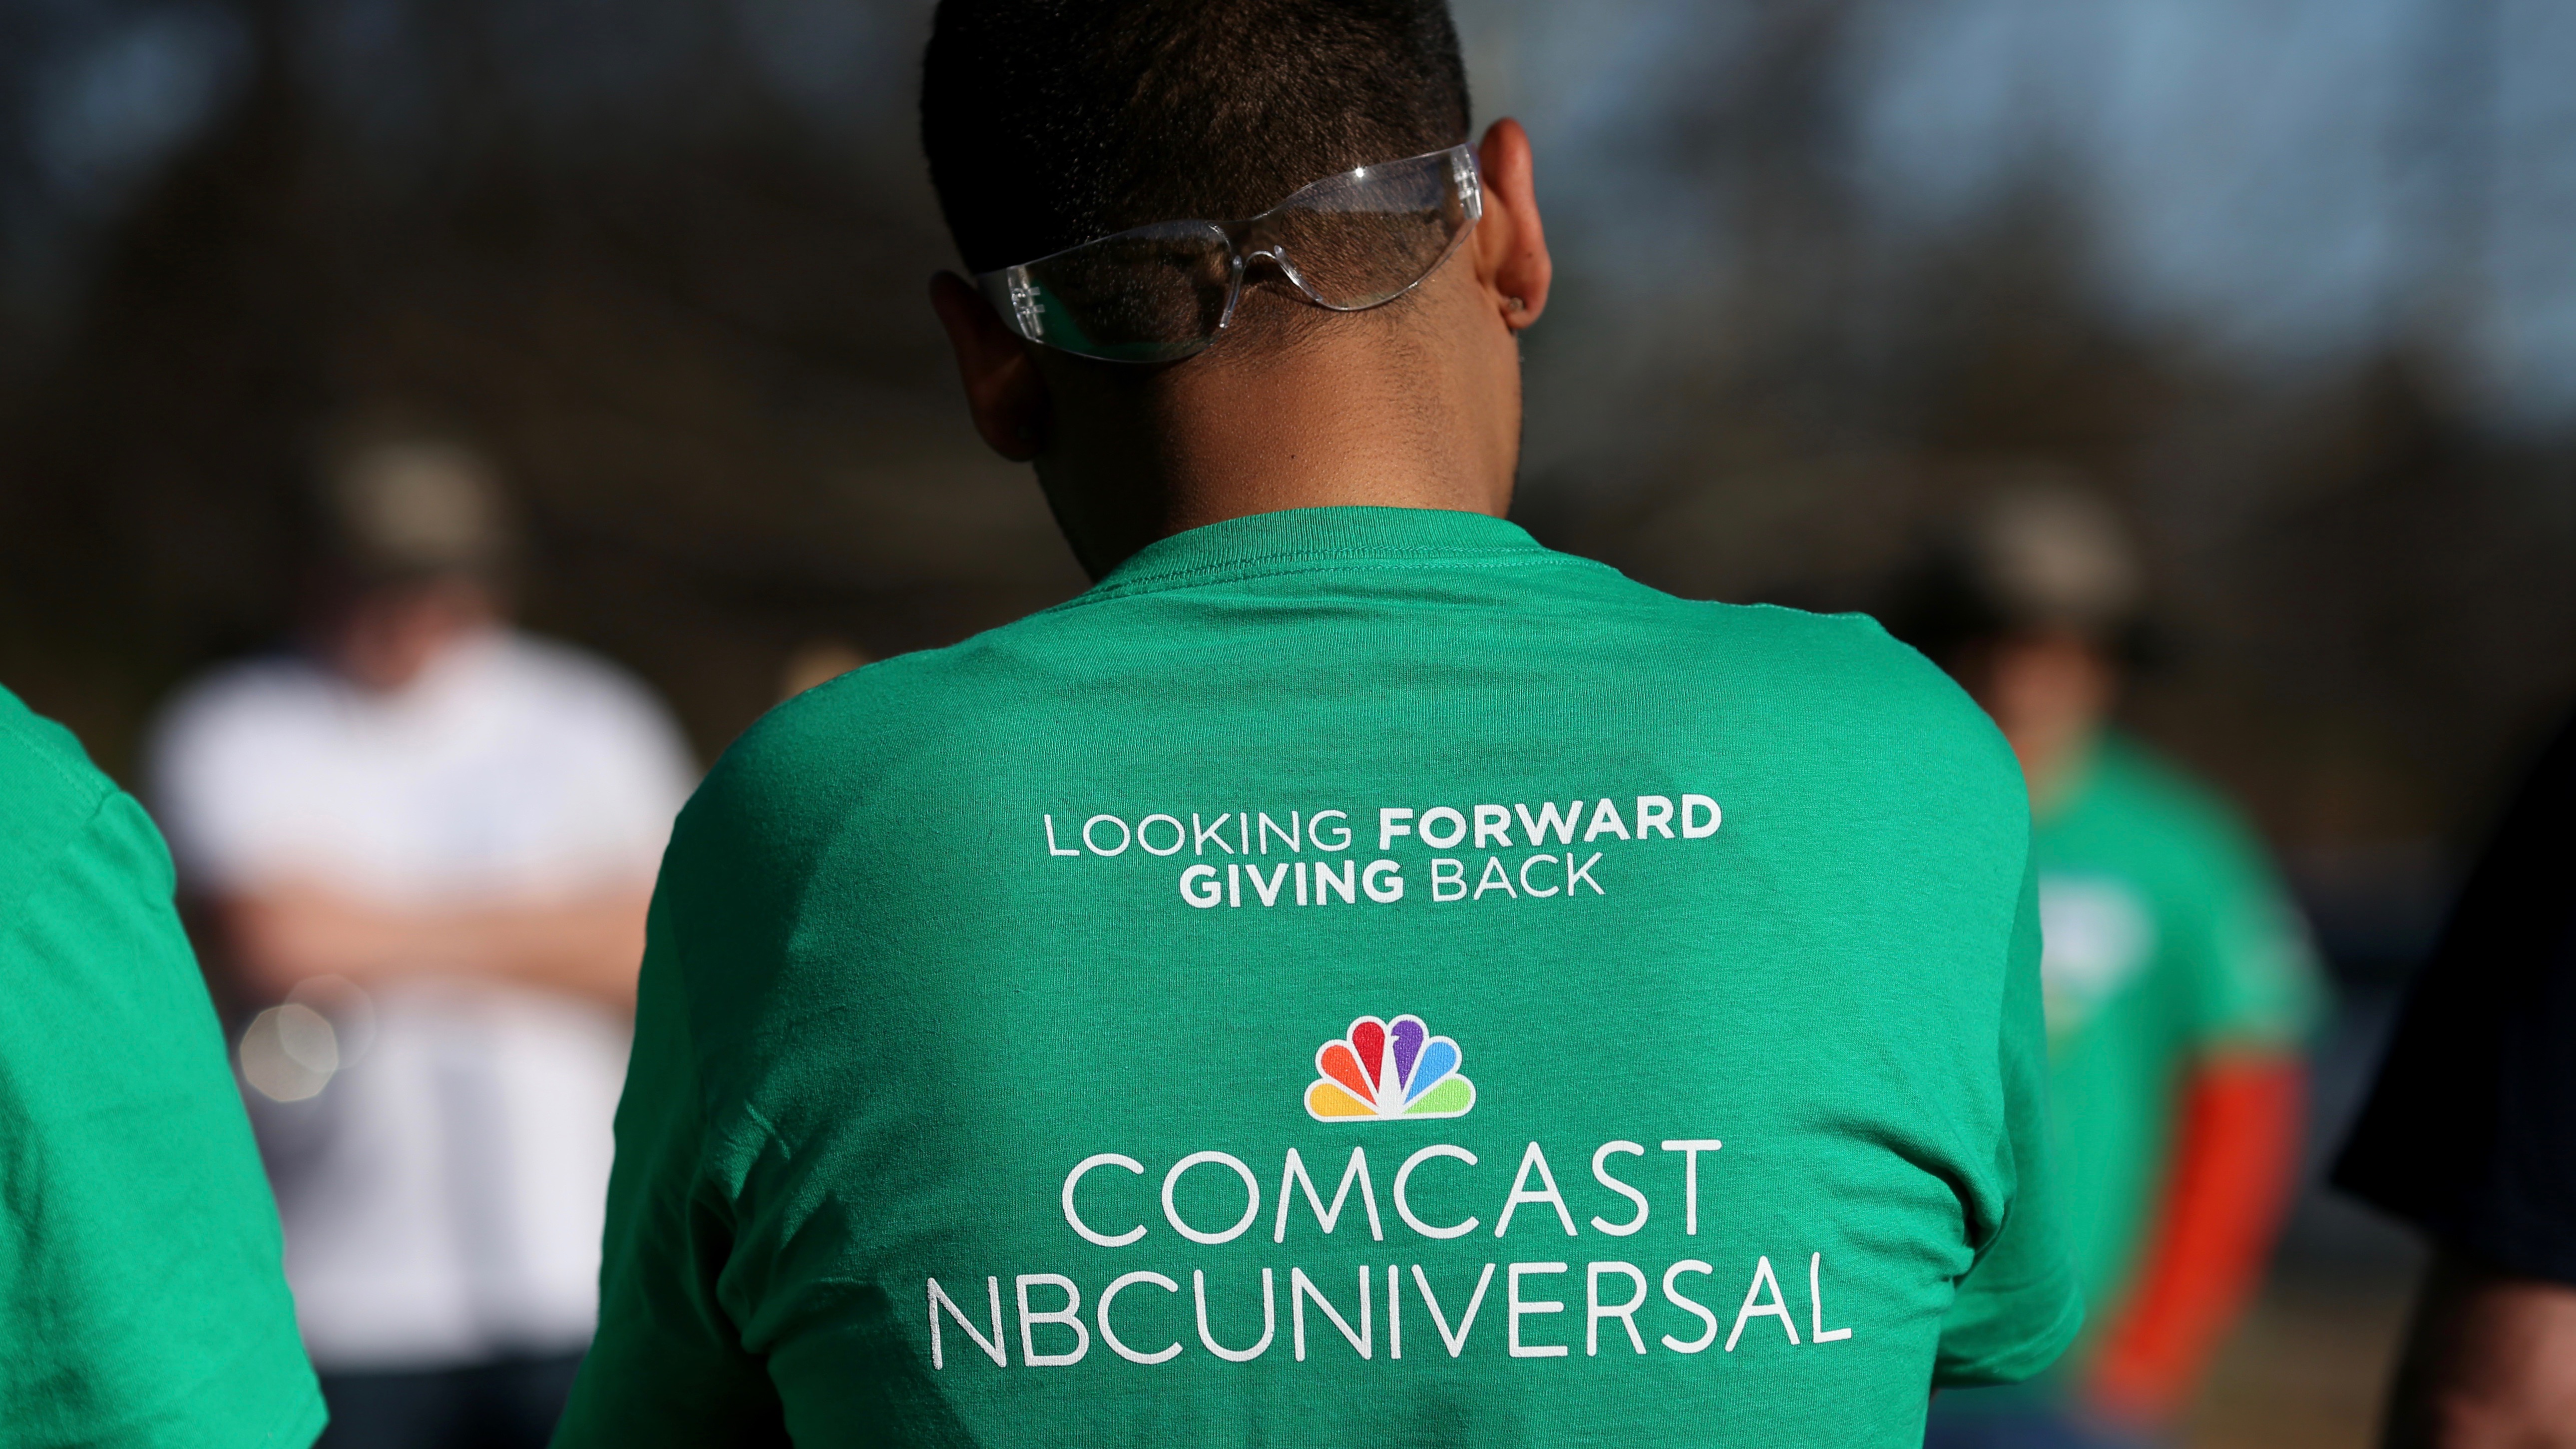 A Comcast Cares Day volunteer wears a shirt that reads "Looking forward to giving back, Comcast NBCUniversal".